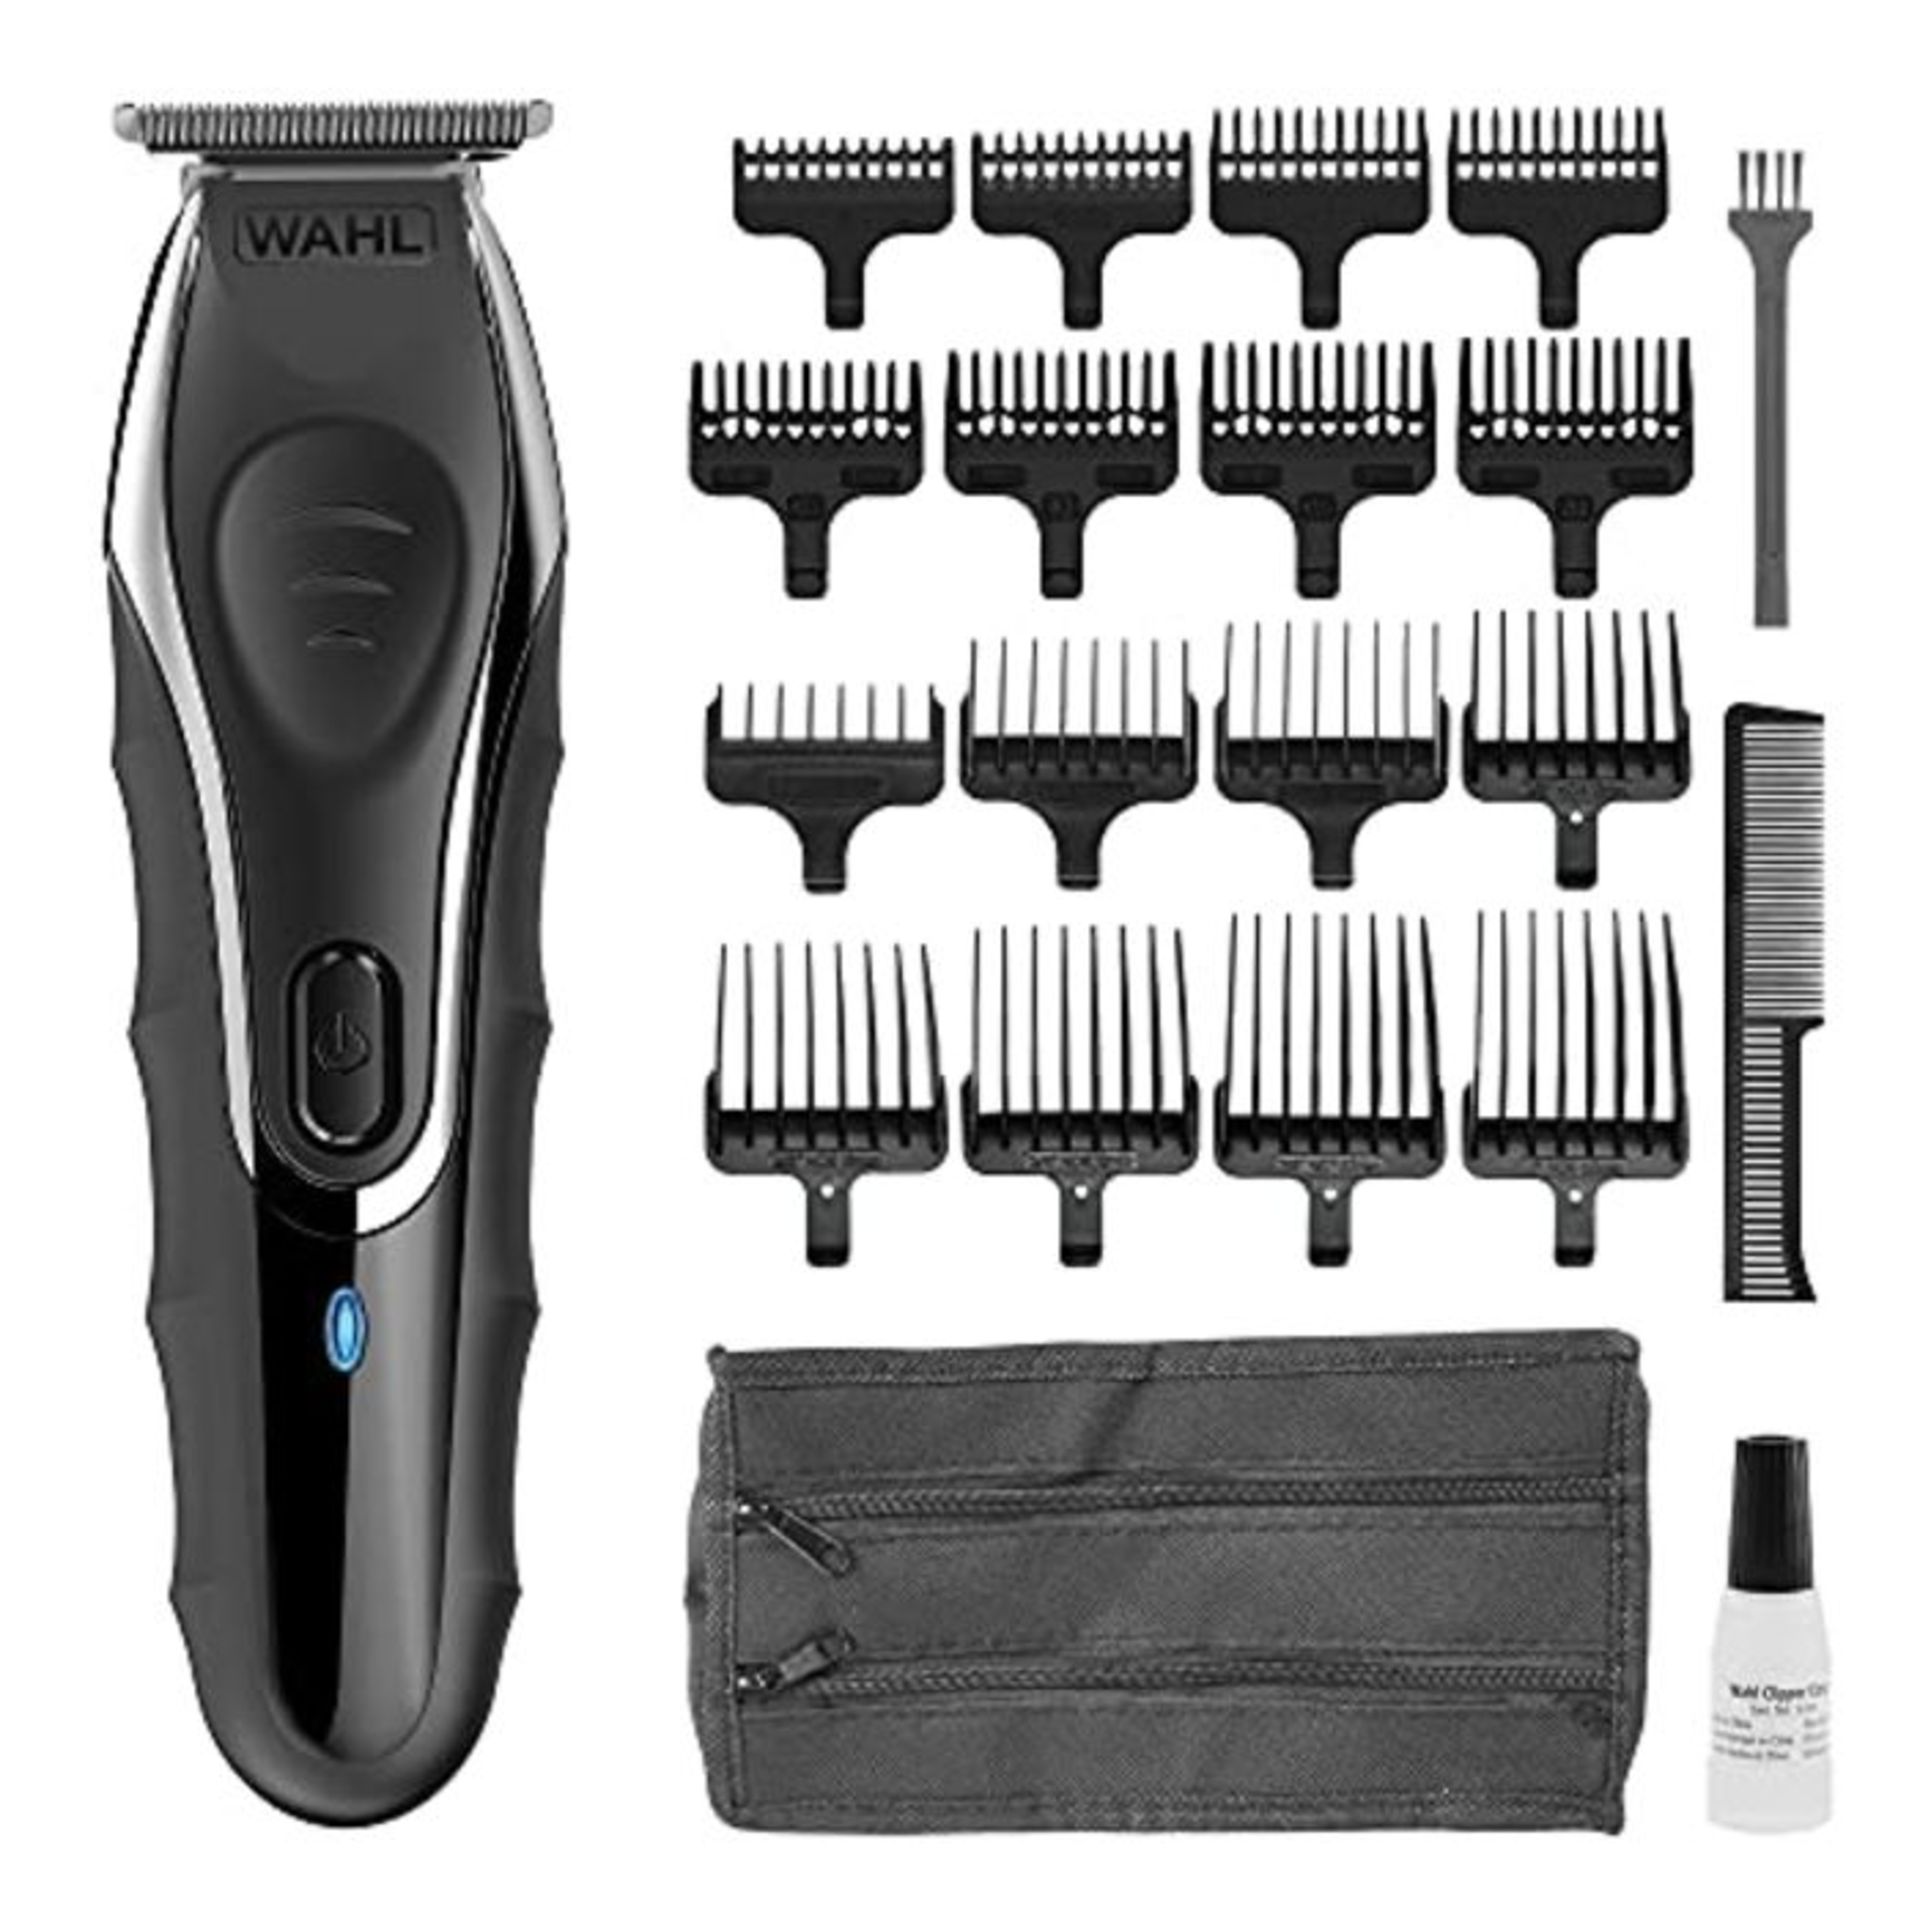 RRP £65.00 WAHL Beard Trimmer Men, Aqua Blade Hair Trimmers for Men, Stubble Trimmer, Male Groomi